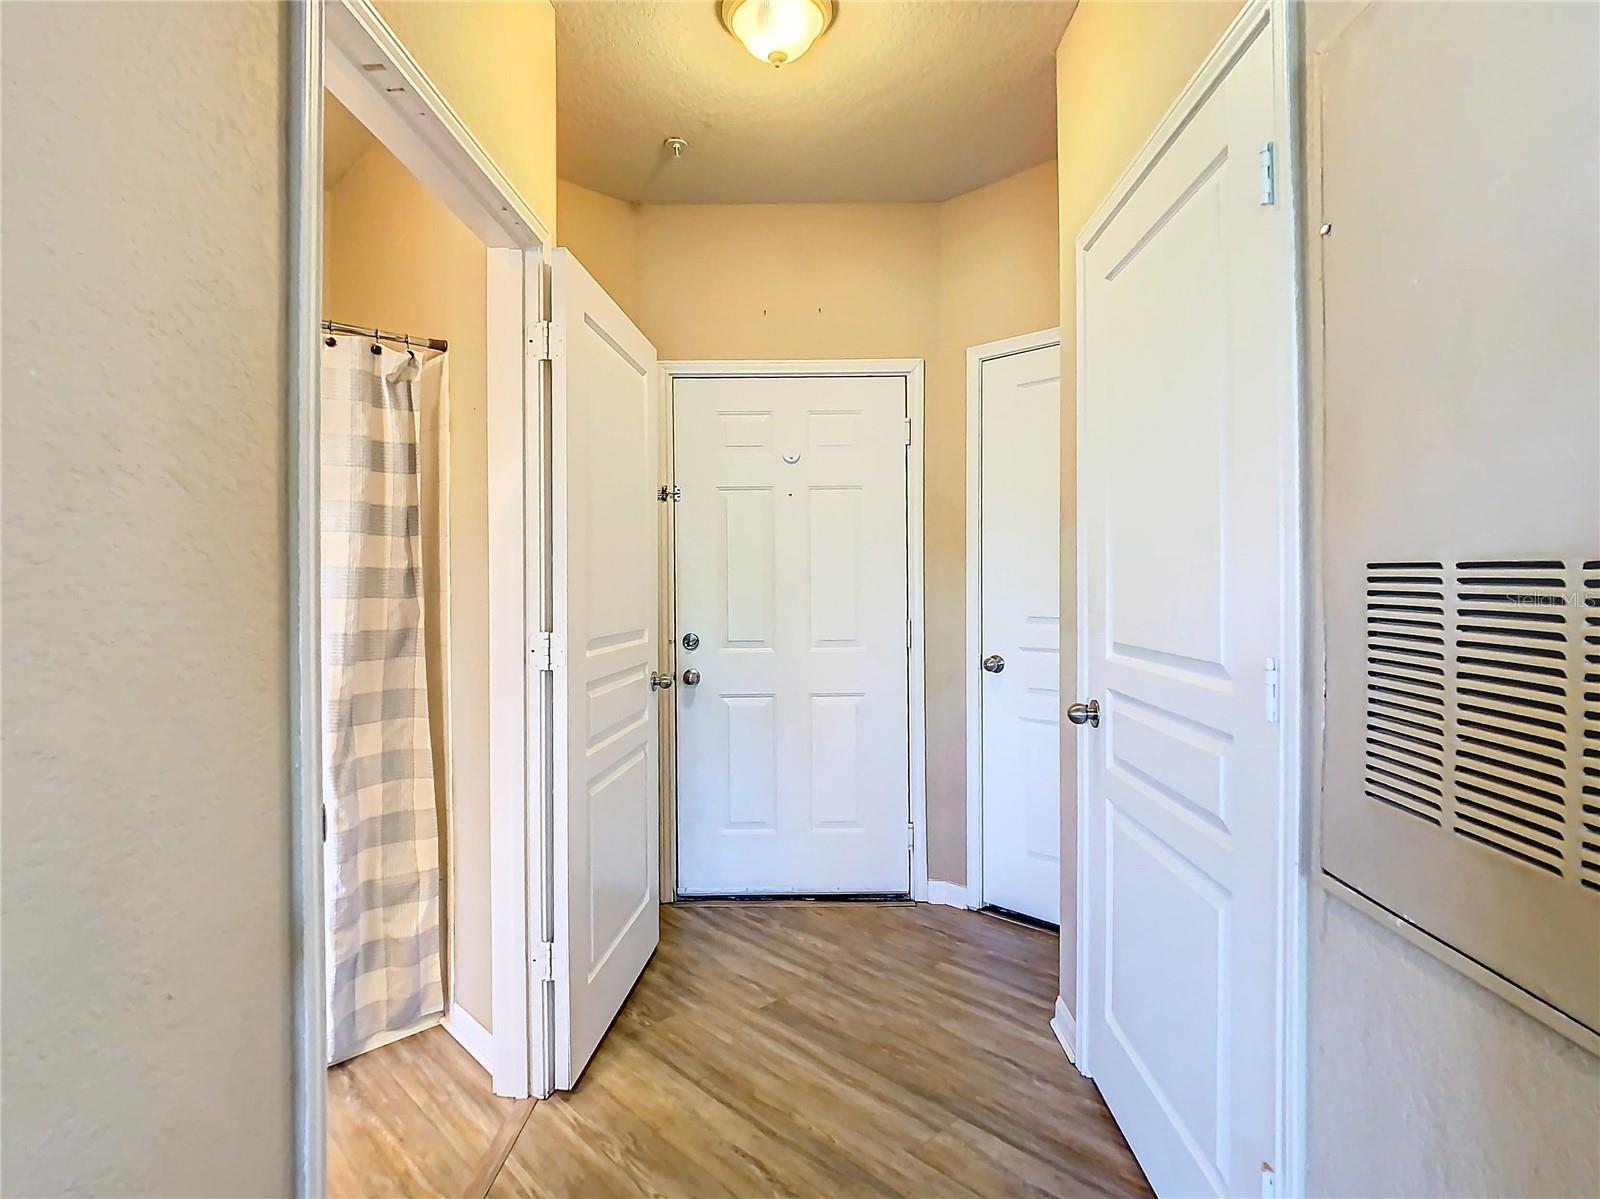 Behind you is the great room. Straight ahead is the front door. To the immediate right is a large walk-in closet. The smaller door to the right of the front door houses the water heater. There is ANOTHER door which is out of view & is ANOTHER closet :-)